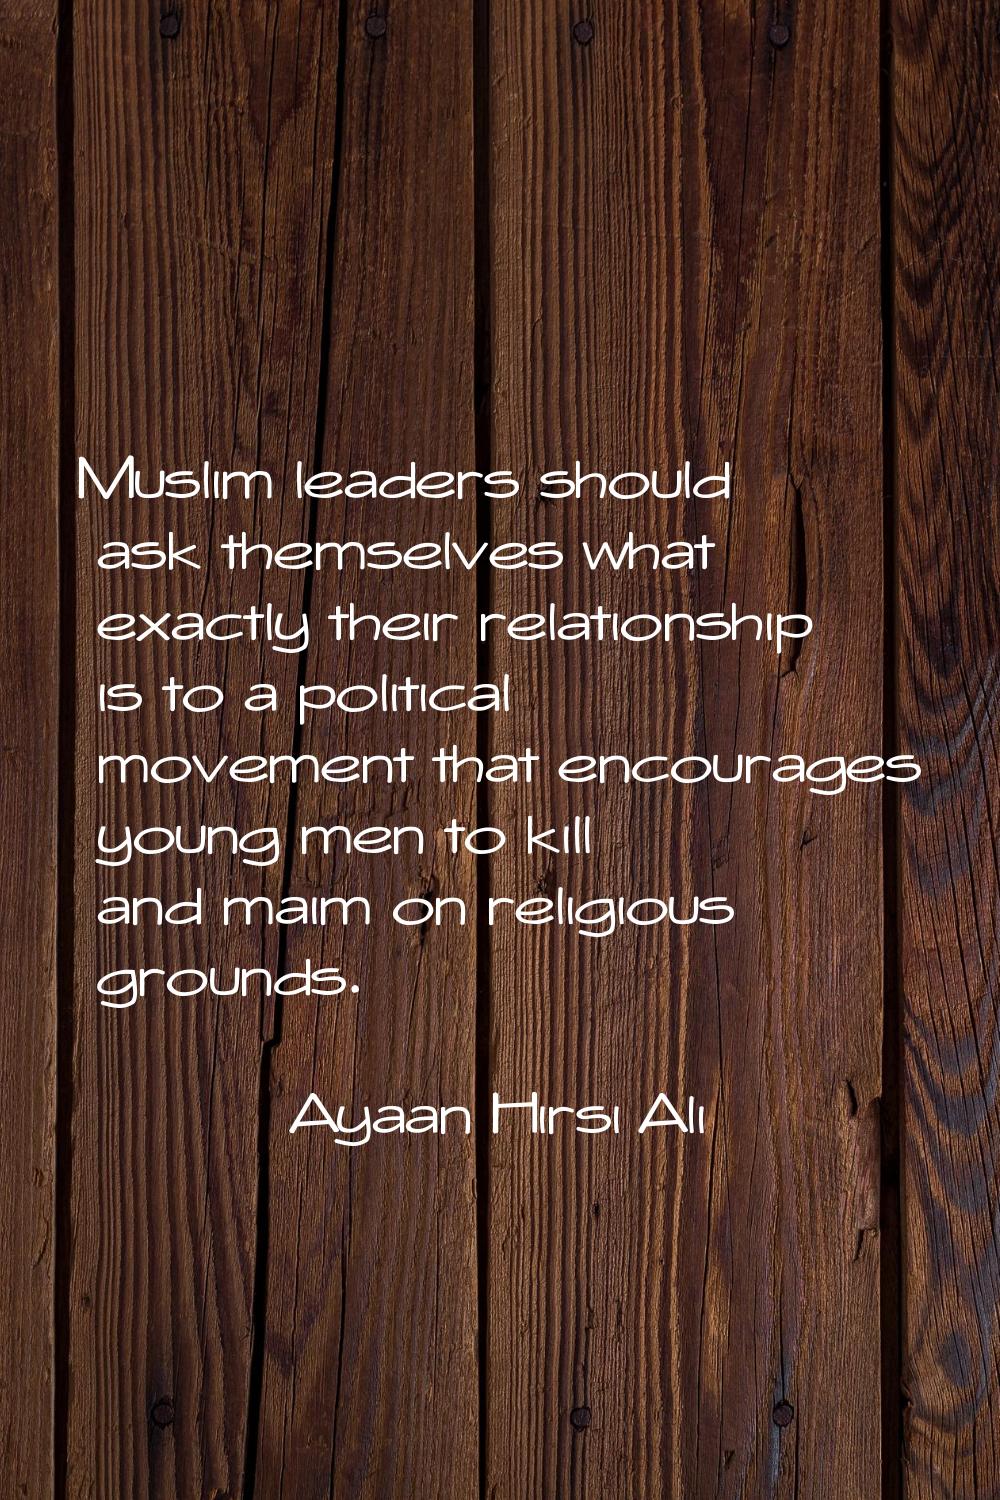 Muslim leaders should ask themselves what exactly their relationship is to a political movement tha